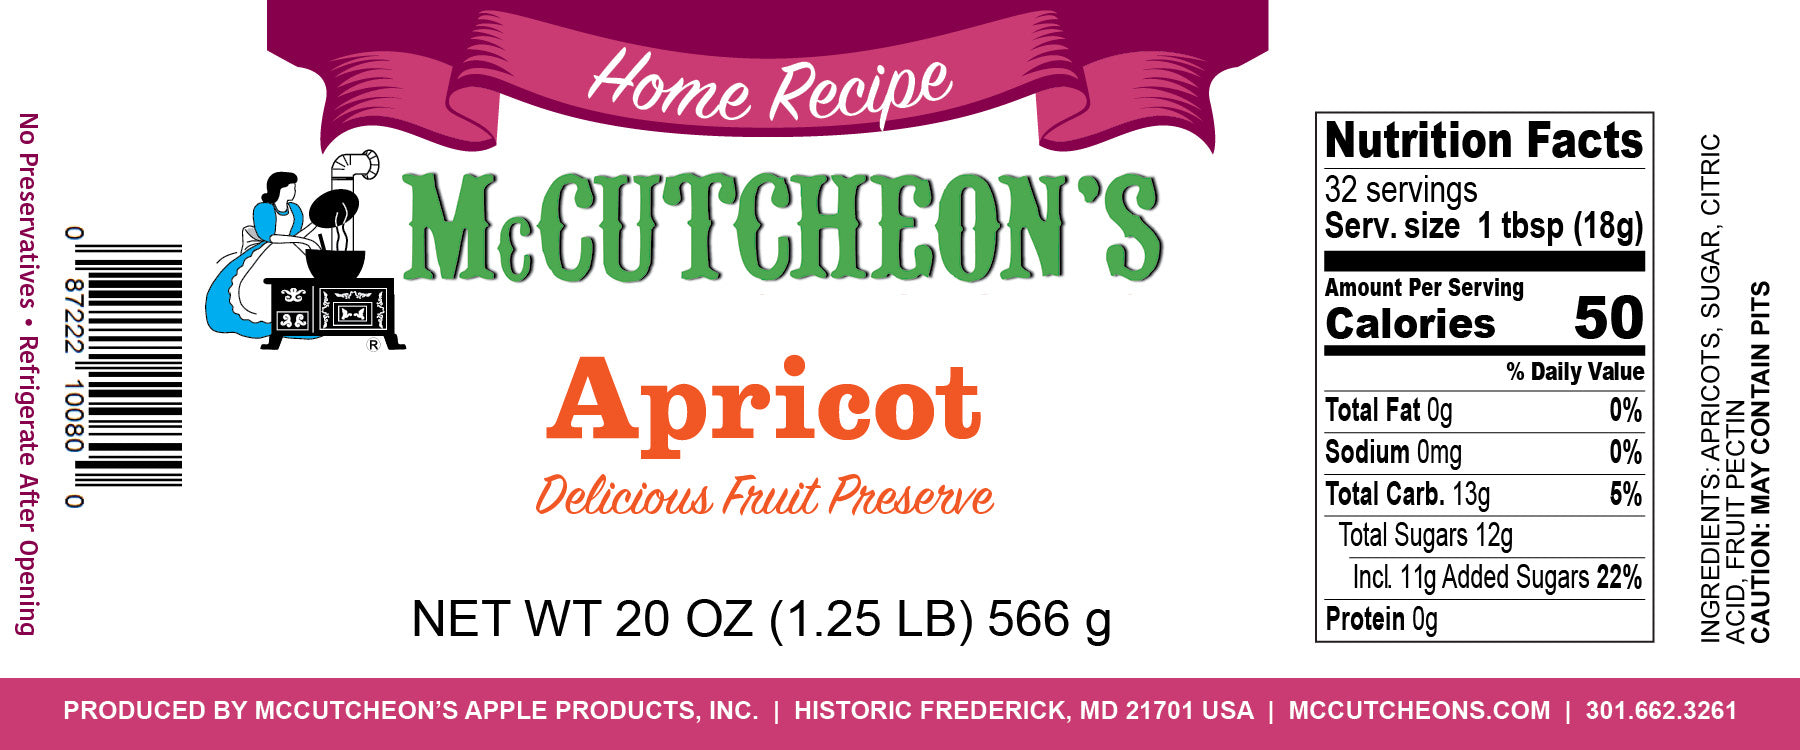 nutritional label for McCutcheon's Apricot Preserves